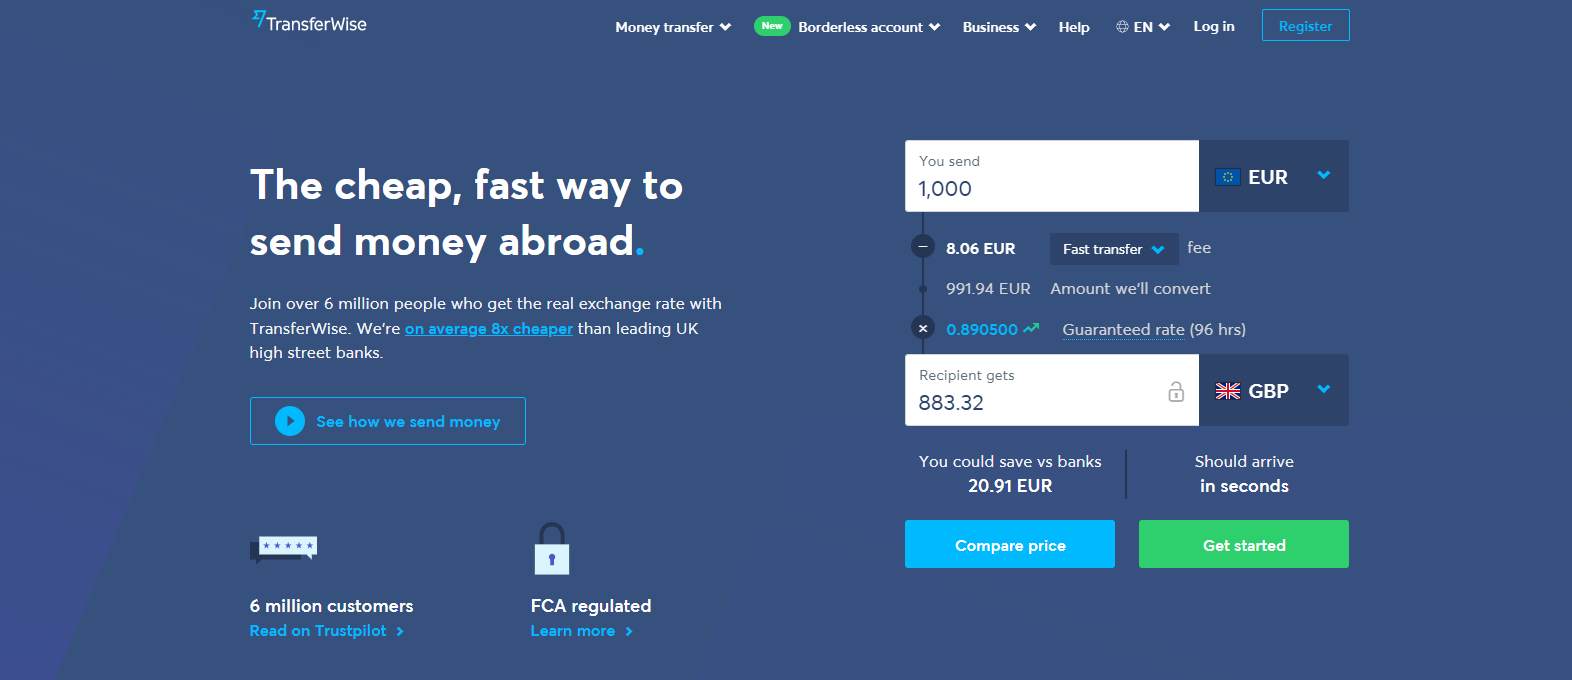 transferwise uses strong words for their landing page copy